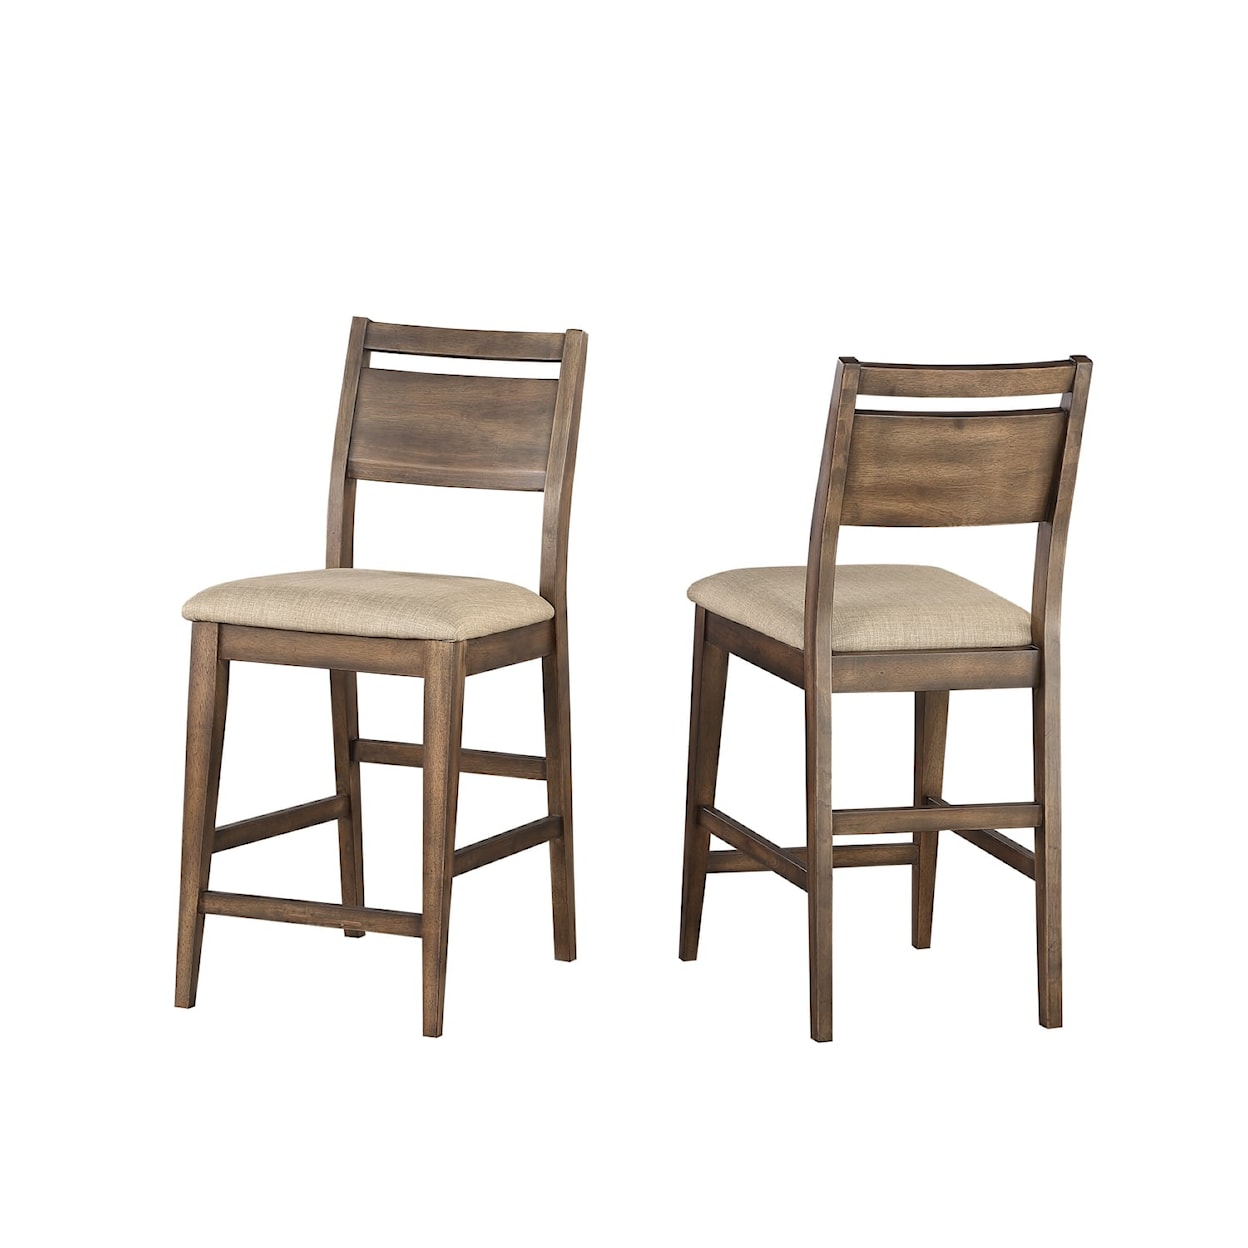 Winners Only Zoey Cushion Barstool